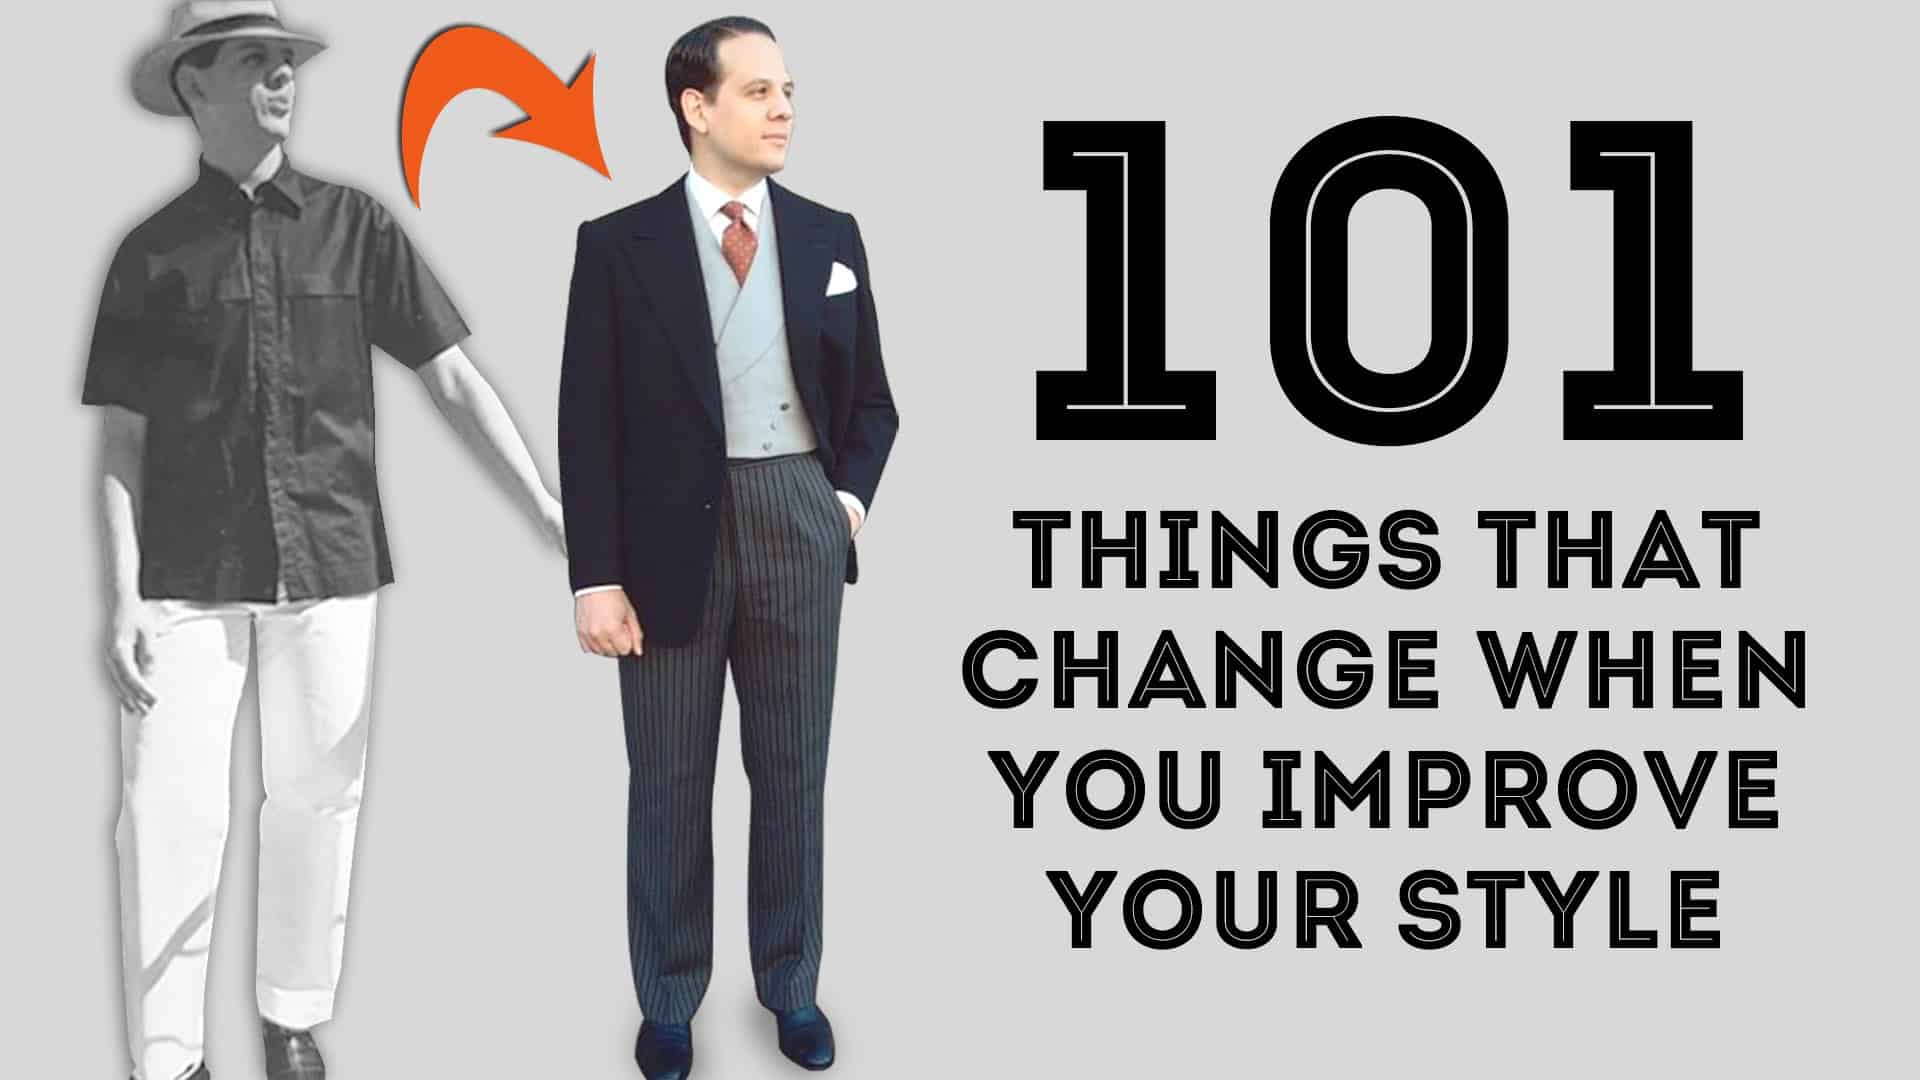 101 Things That Change When You Upgrade Your Wardrobe and Improve Your Style